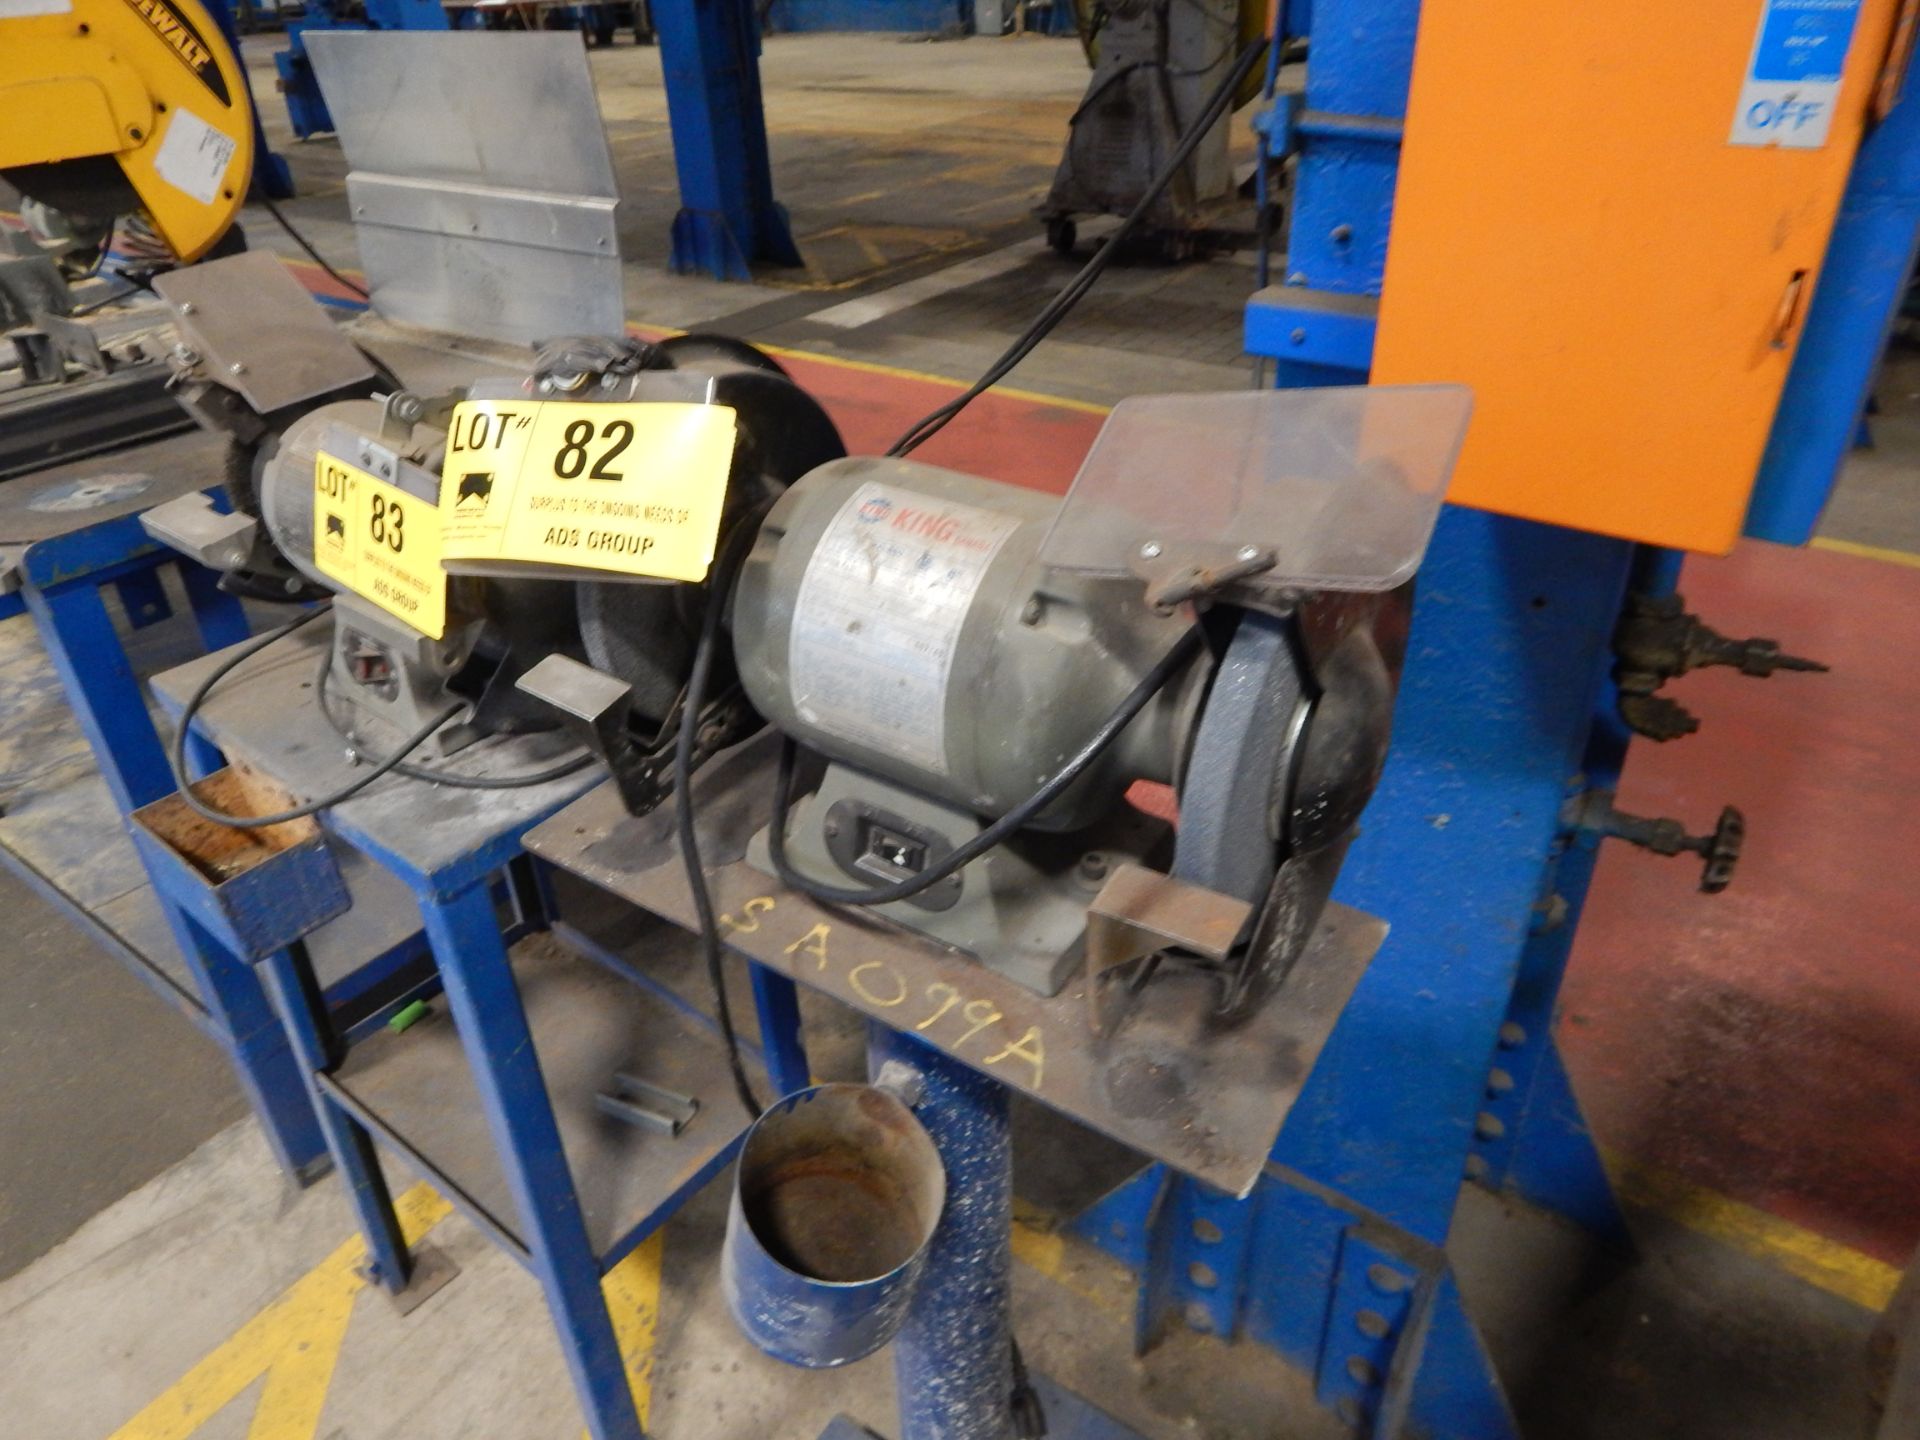 KING CANADA DOUBLE END BENCH GRINDER